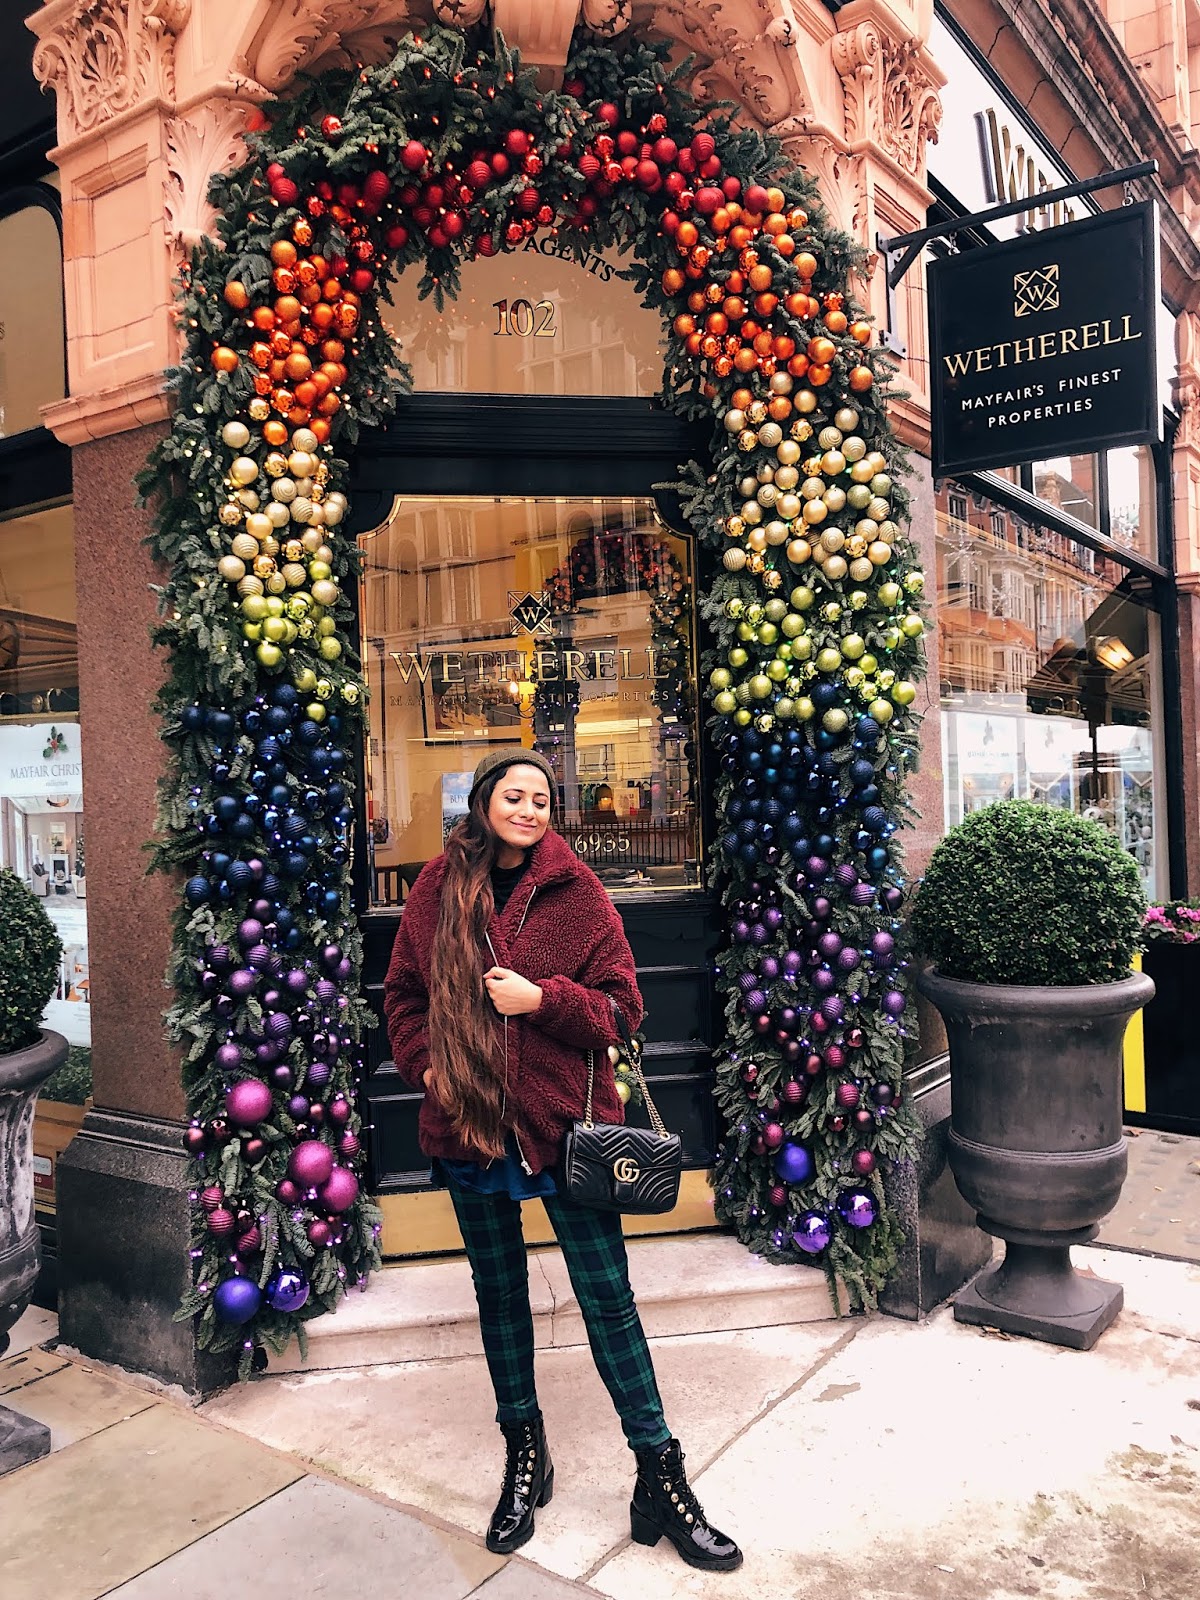 christmas in london, christmas decoration in london, christmas 2018, christmas decoration london 2018, indian blogger, london blogger, mayfair london, mayfair christmas decoration, london street style